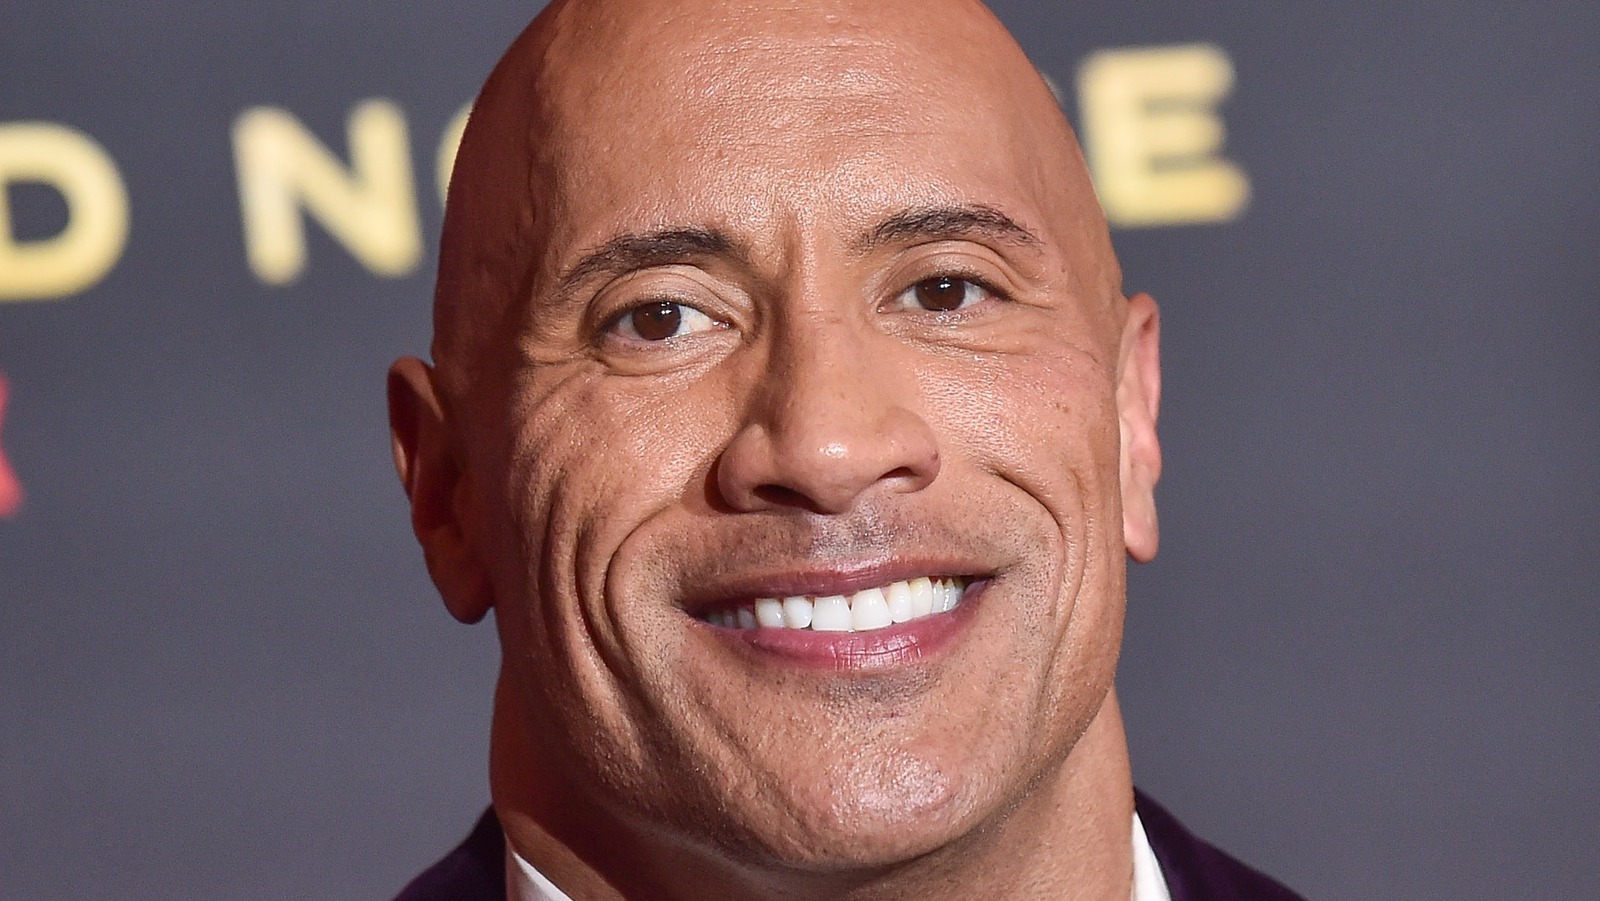 The Rock' buys every Snickers at a 7-Eleven to 'right his wrongs